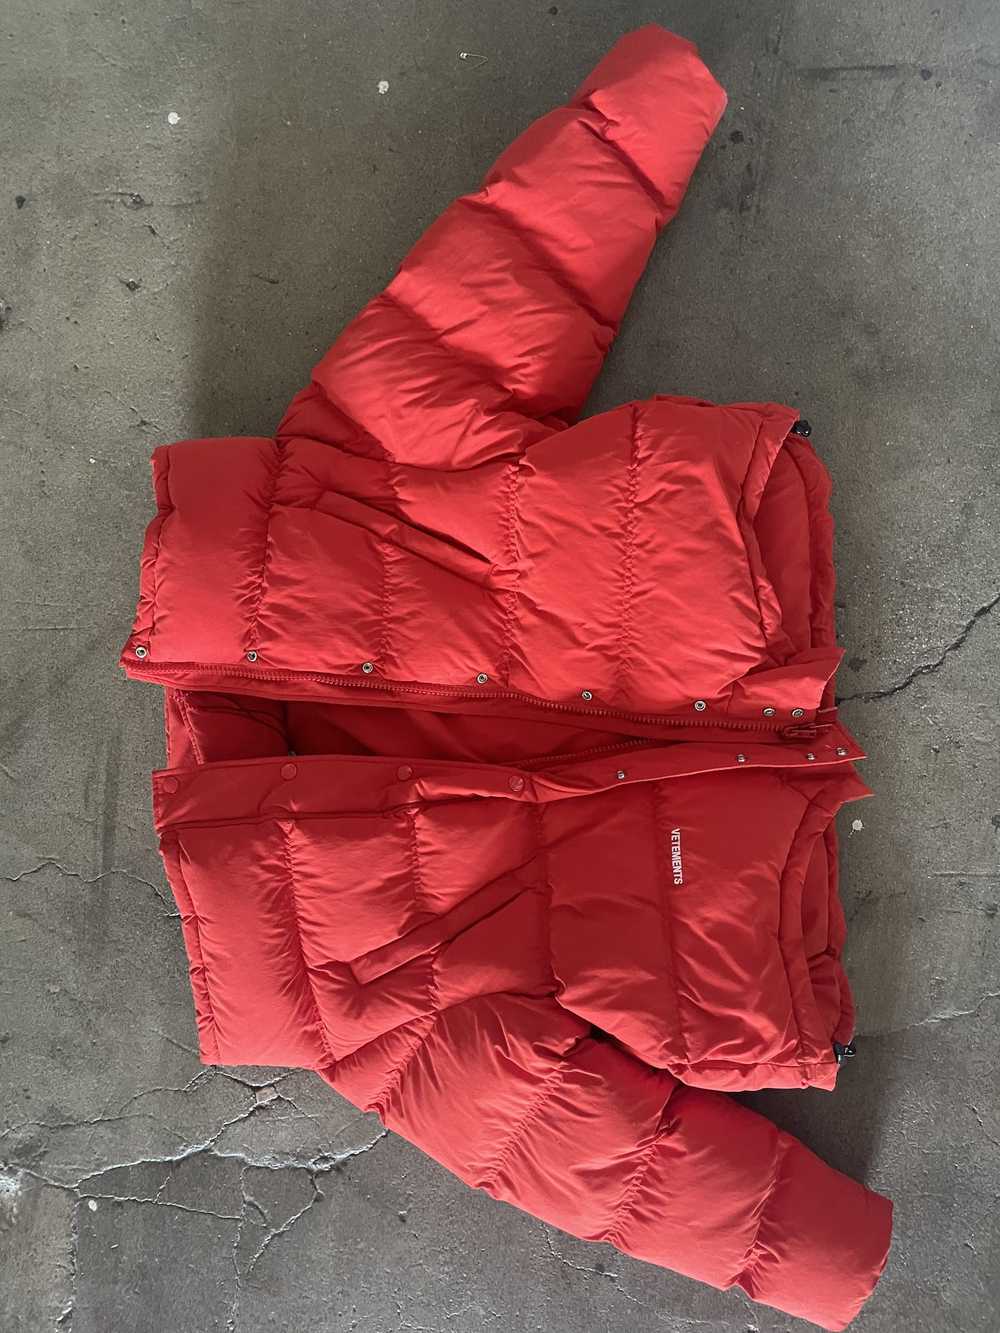 Vetements AW 2019 Upside Down Puffer Jacket - image 2